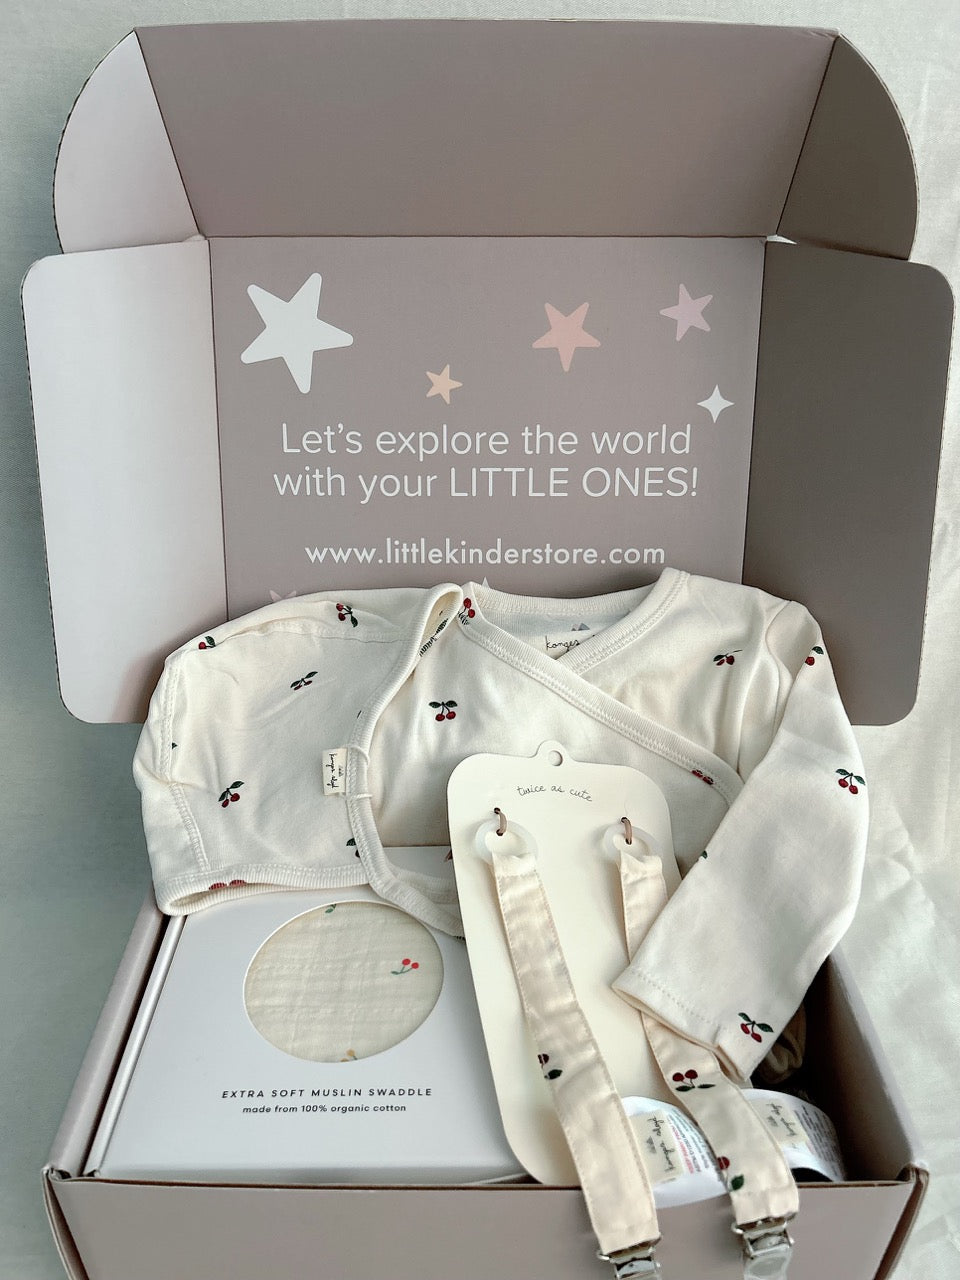 Share more than 205 just born baby gifts